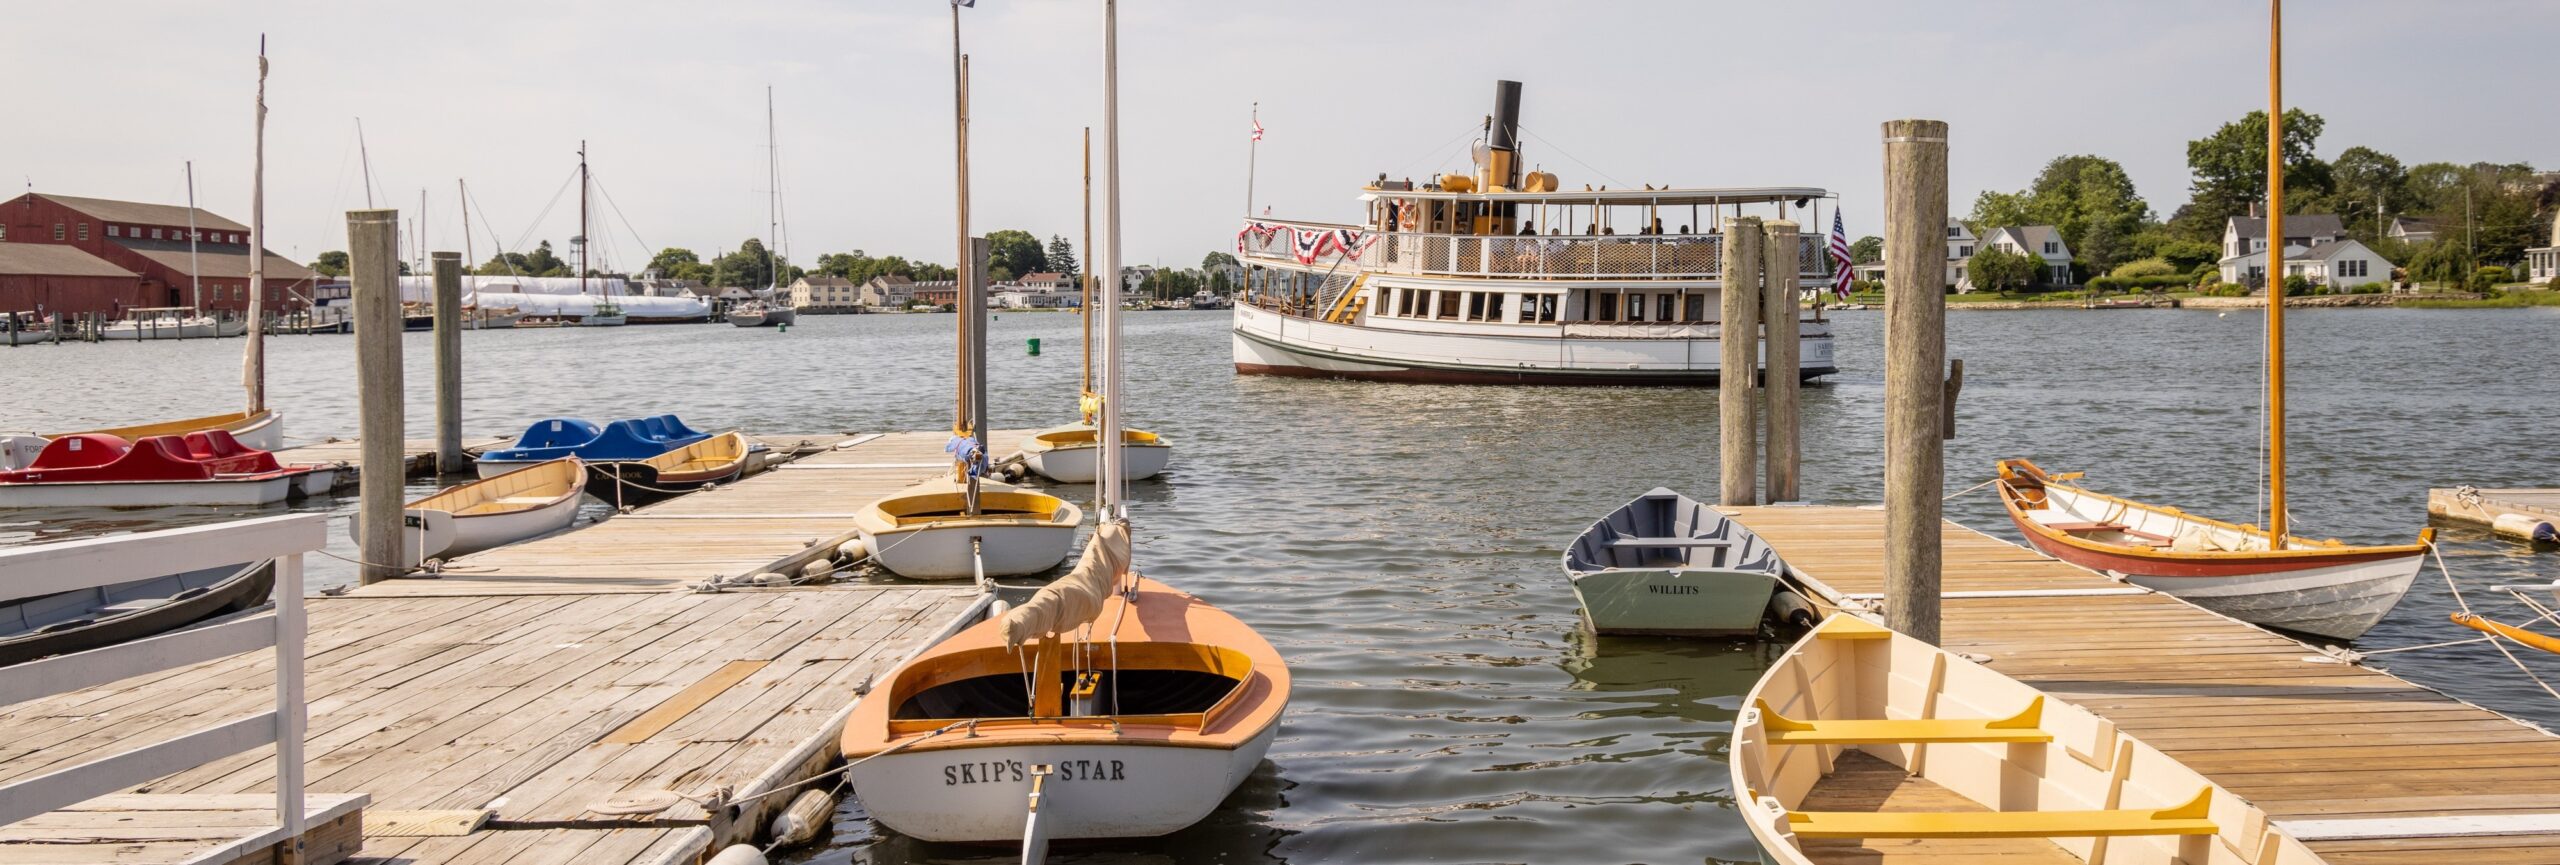 Get out on the water on a Museum boat.